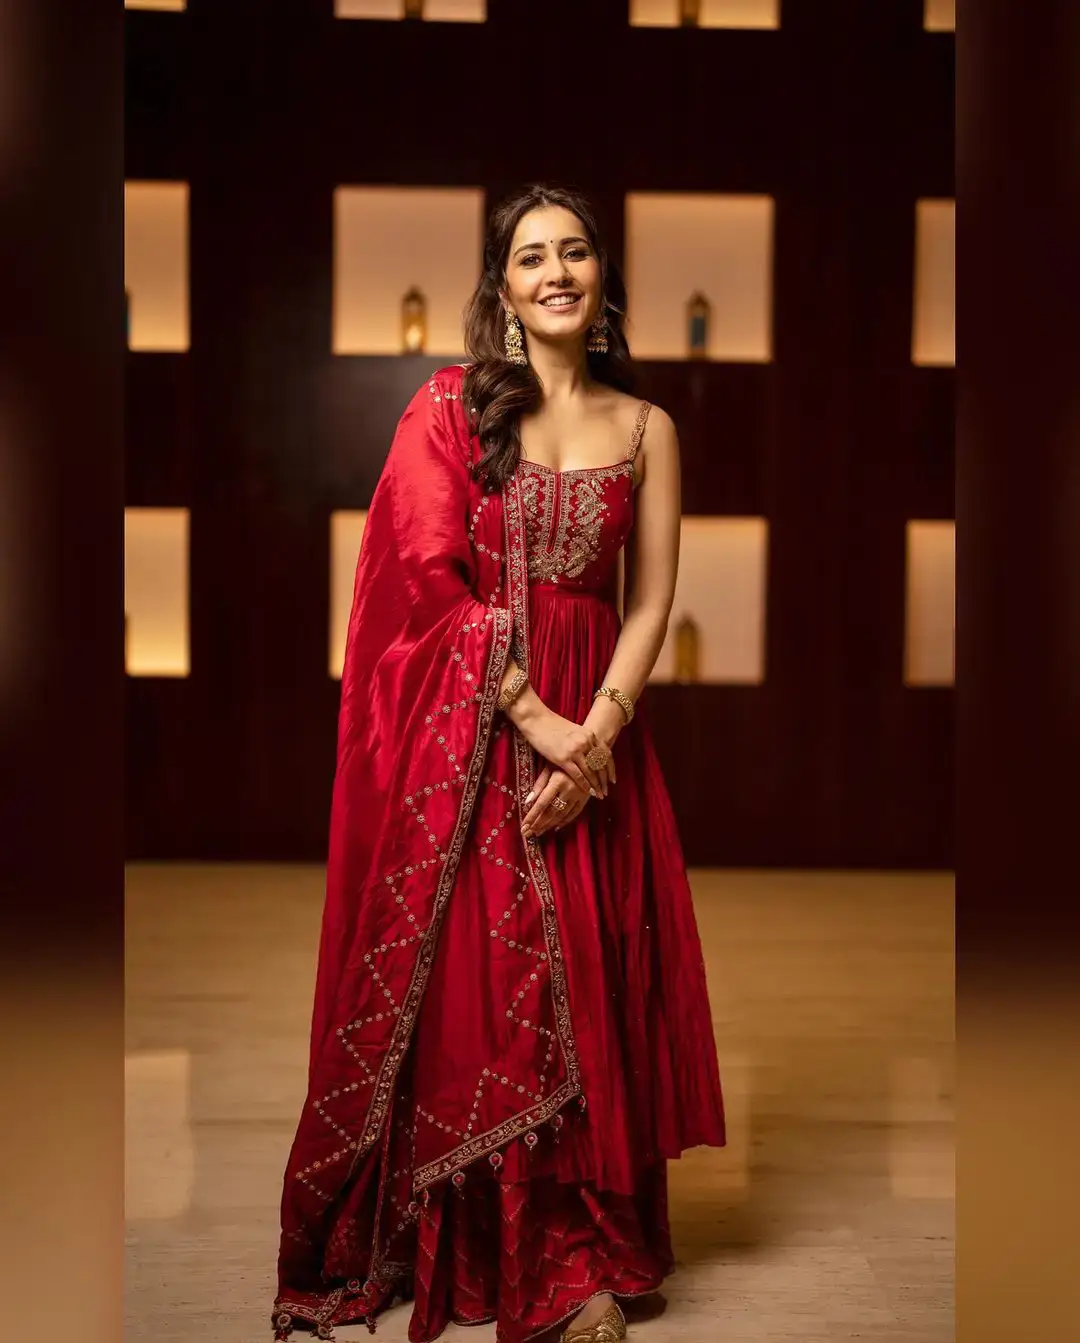 RAASHI KHANNA MESMERIZING LOOKS IN BEAUTIFUL RED GOWN 2